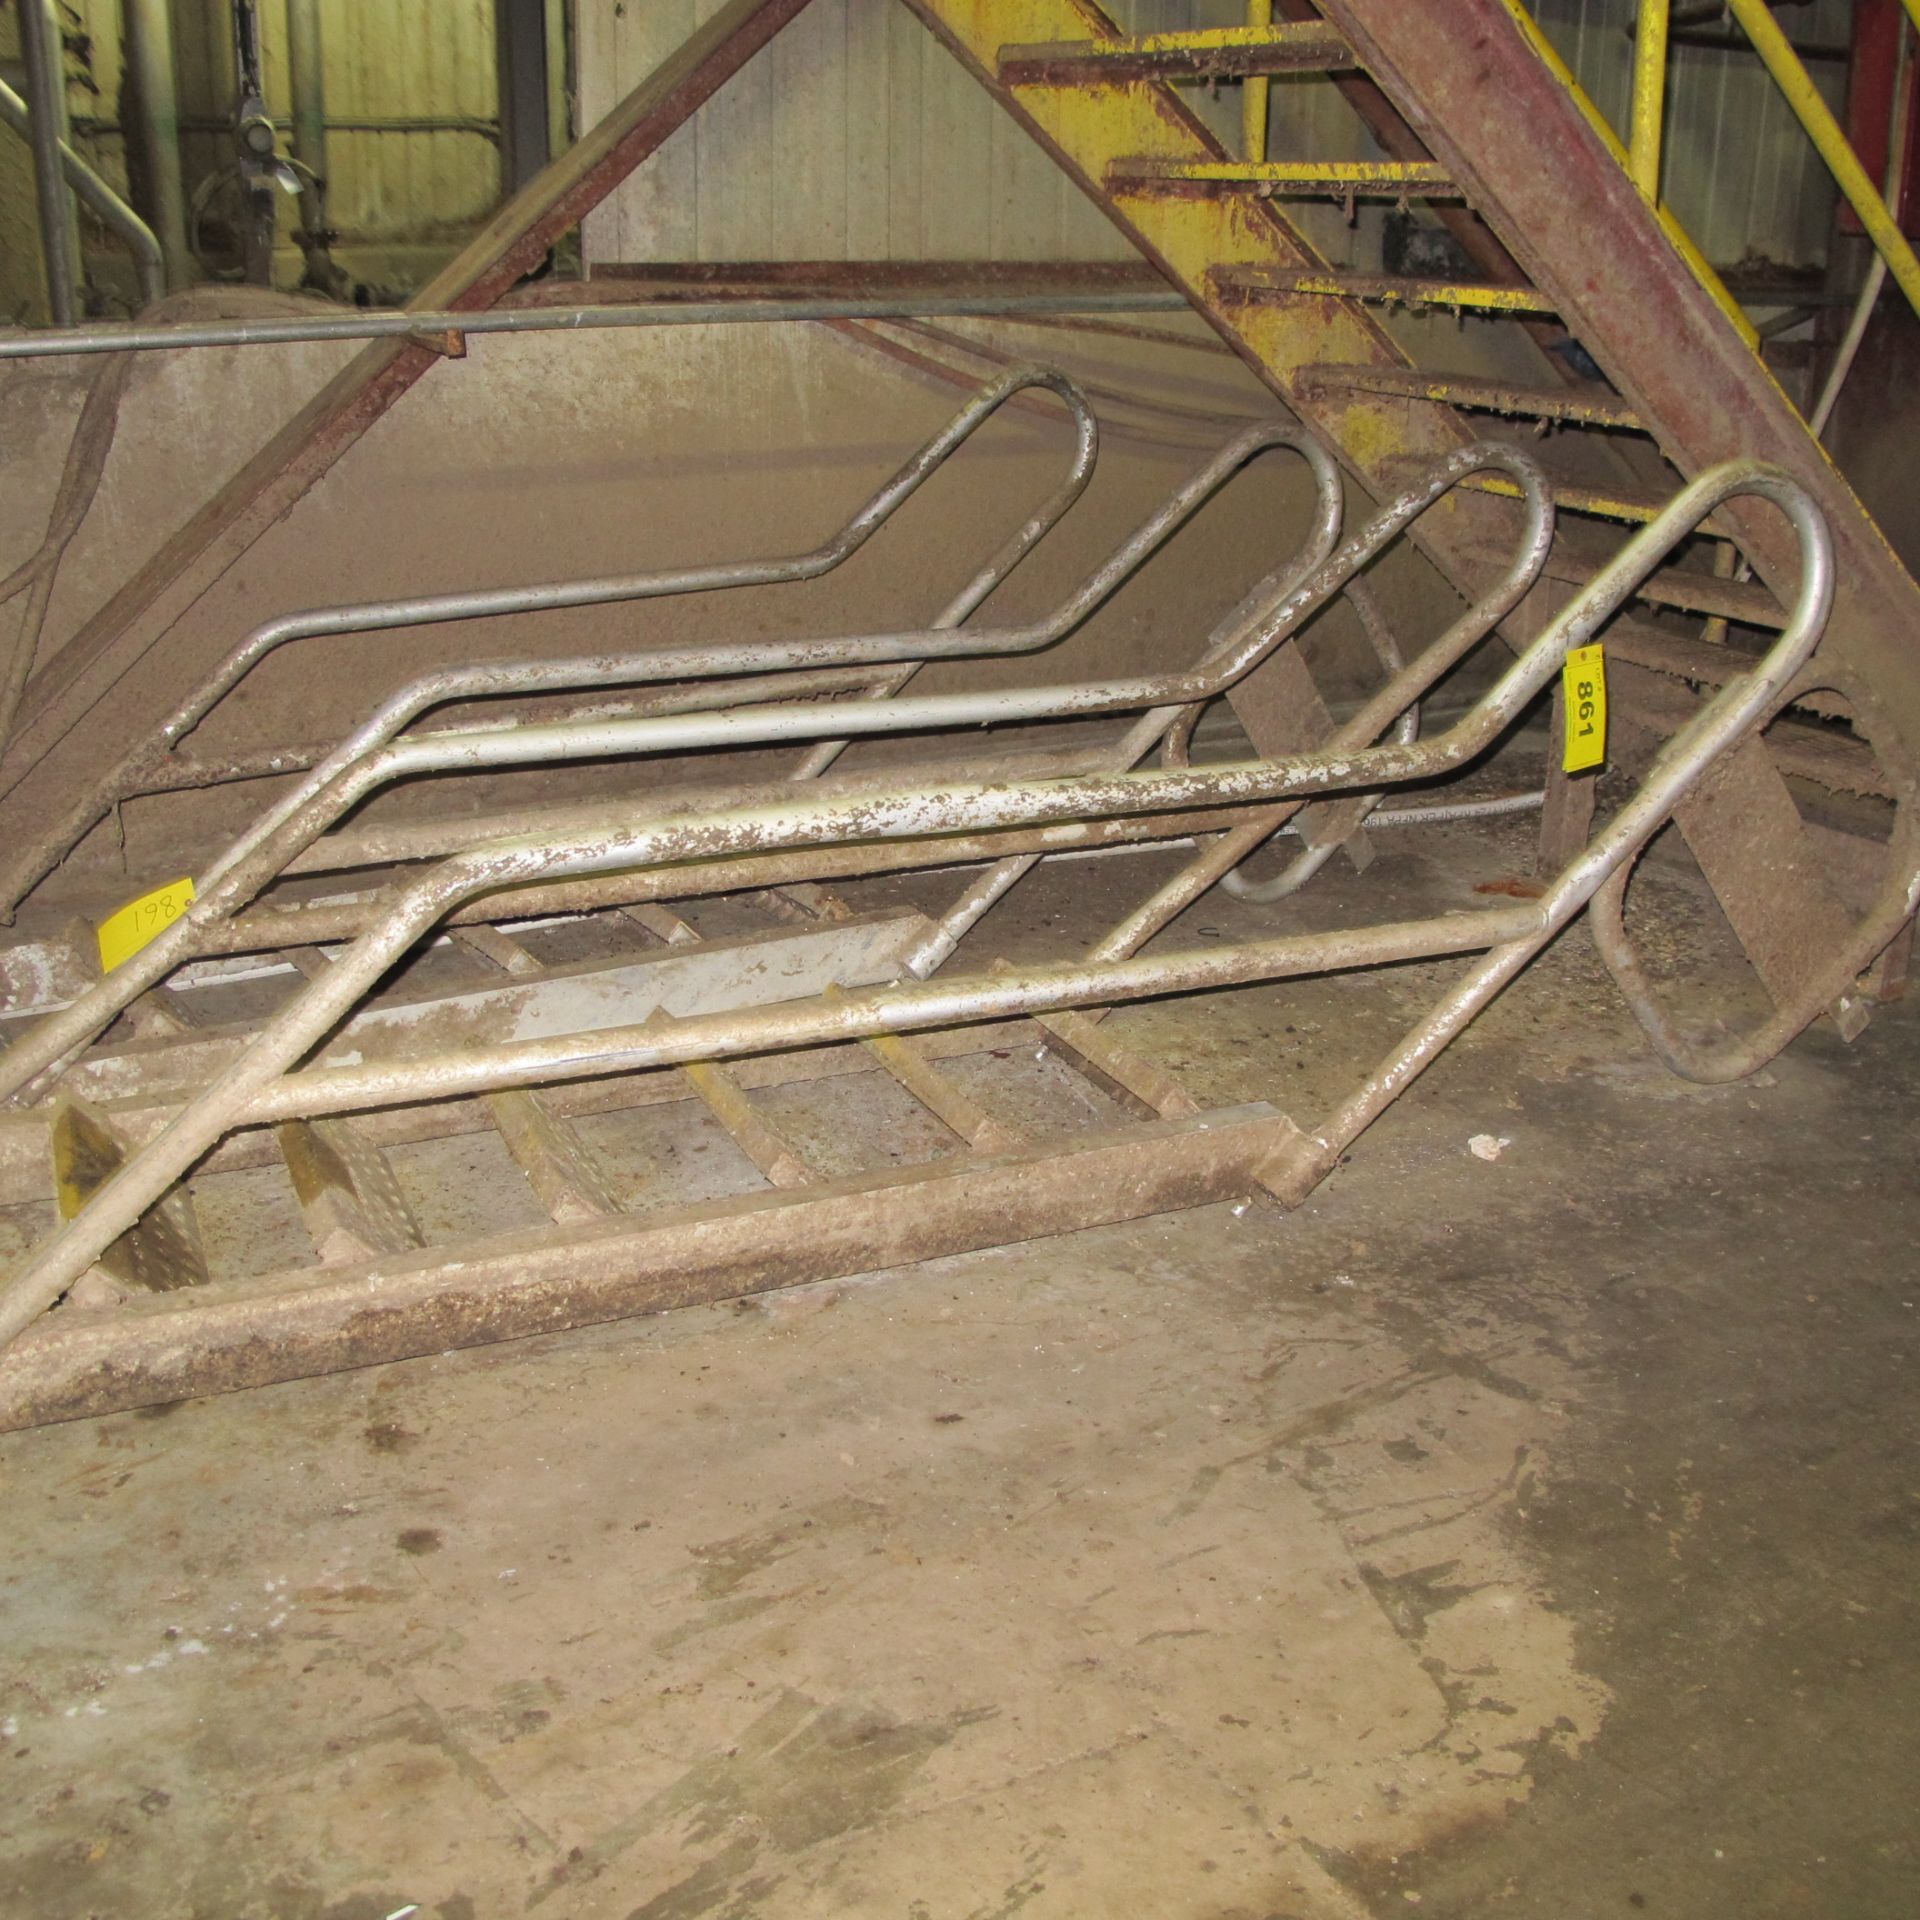 LOT OF (2) STAIRCASES AND (2) METAL HORSES (WEST BUILDING, GROUND LEVEL/BASEMENT UNDER PAPER